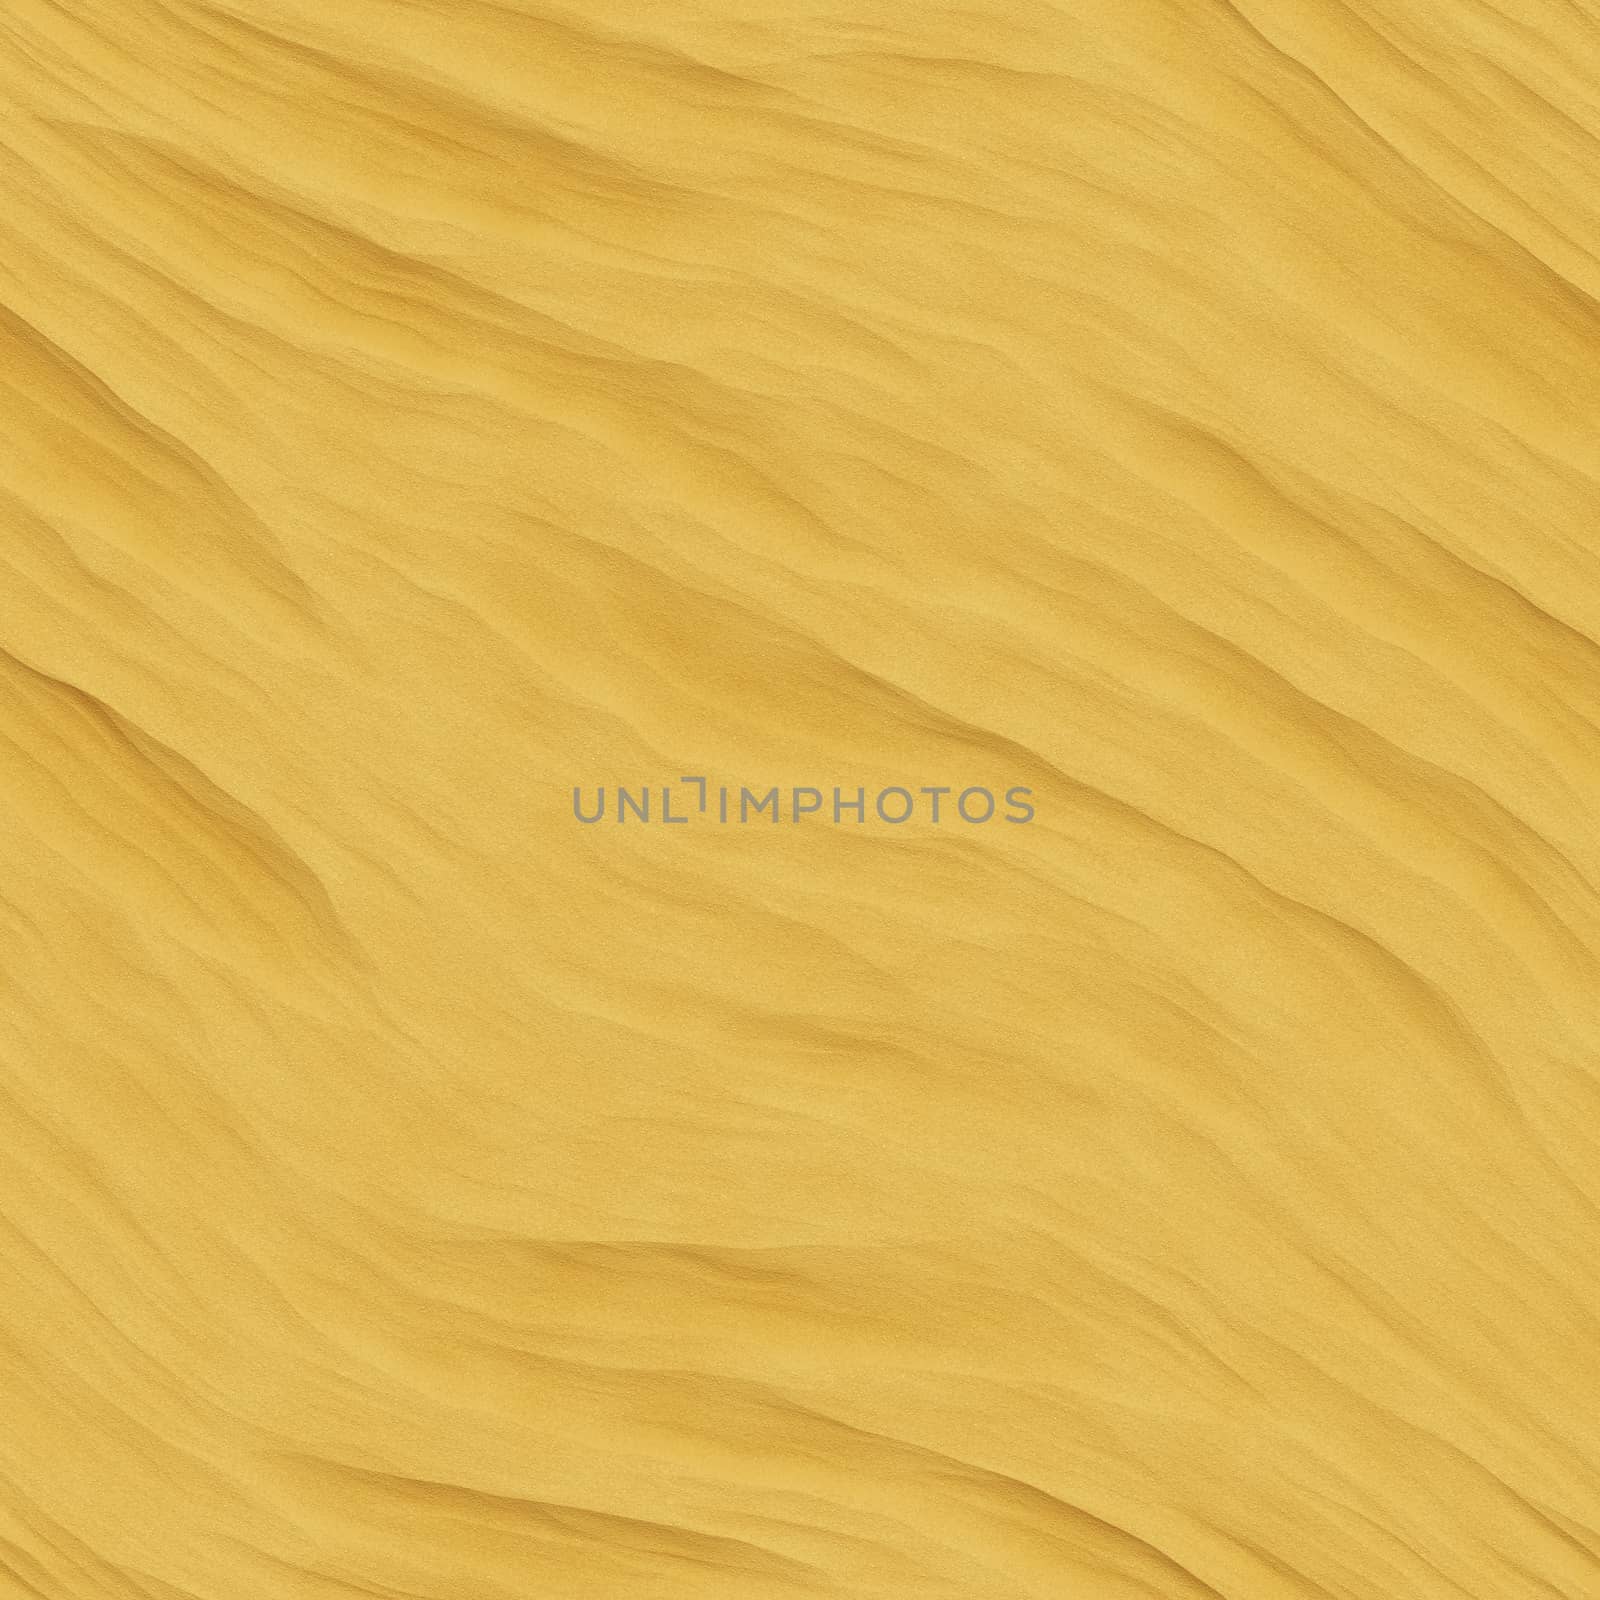 2d illustration of a seamless sand texture